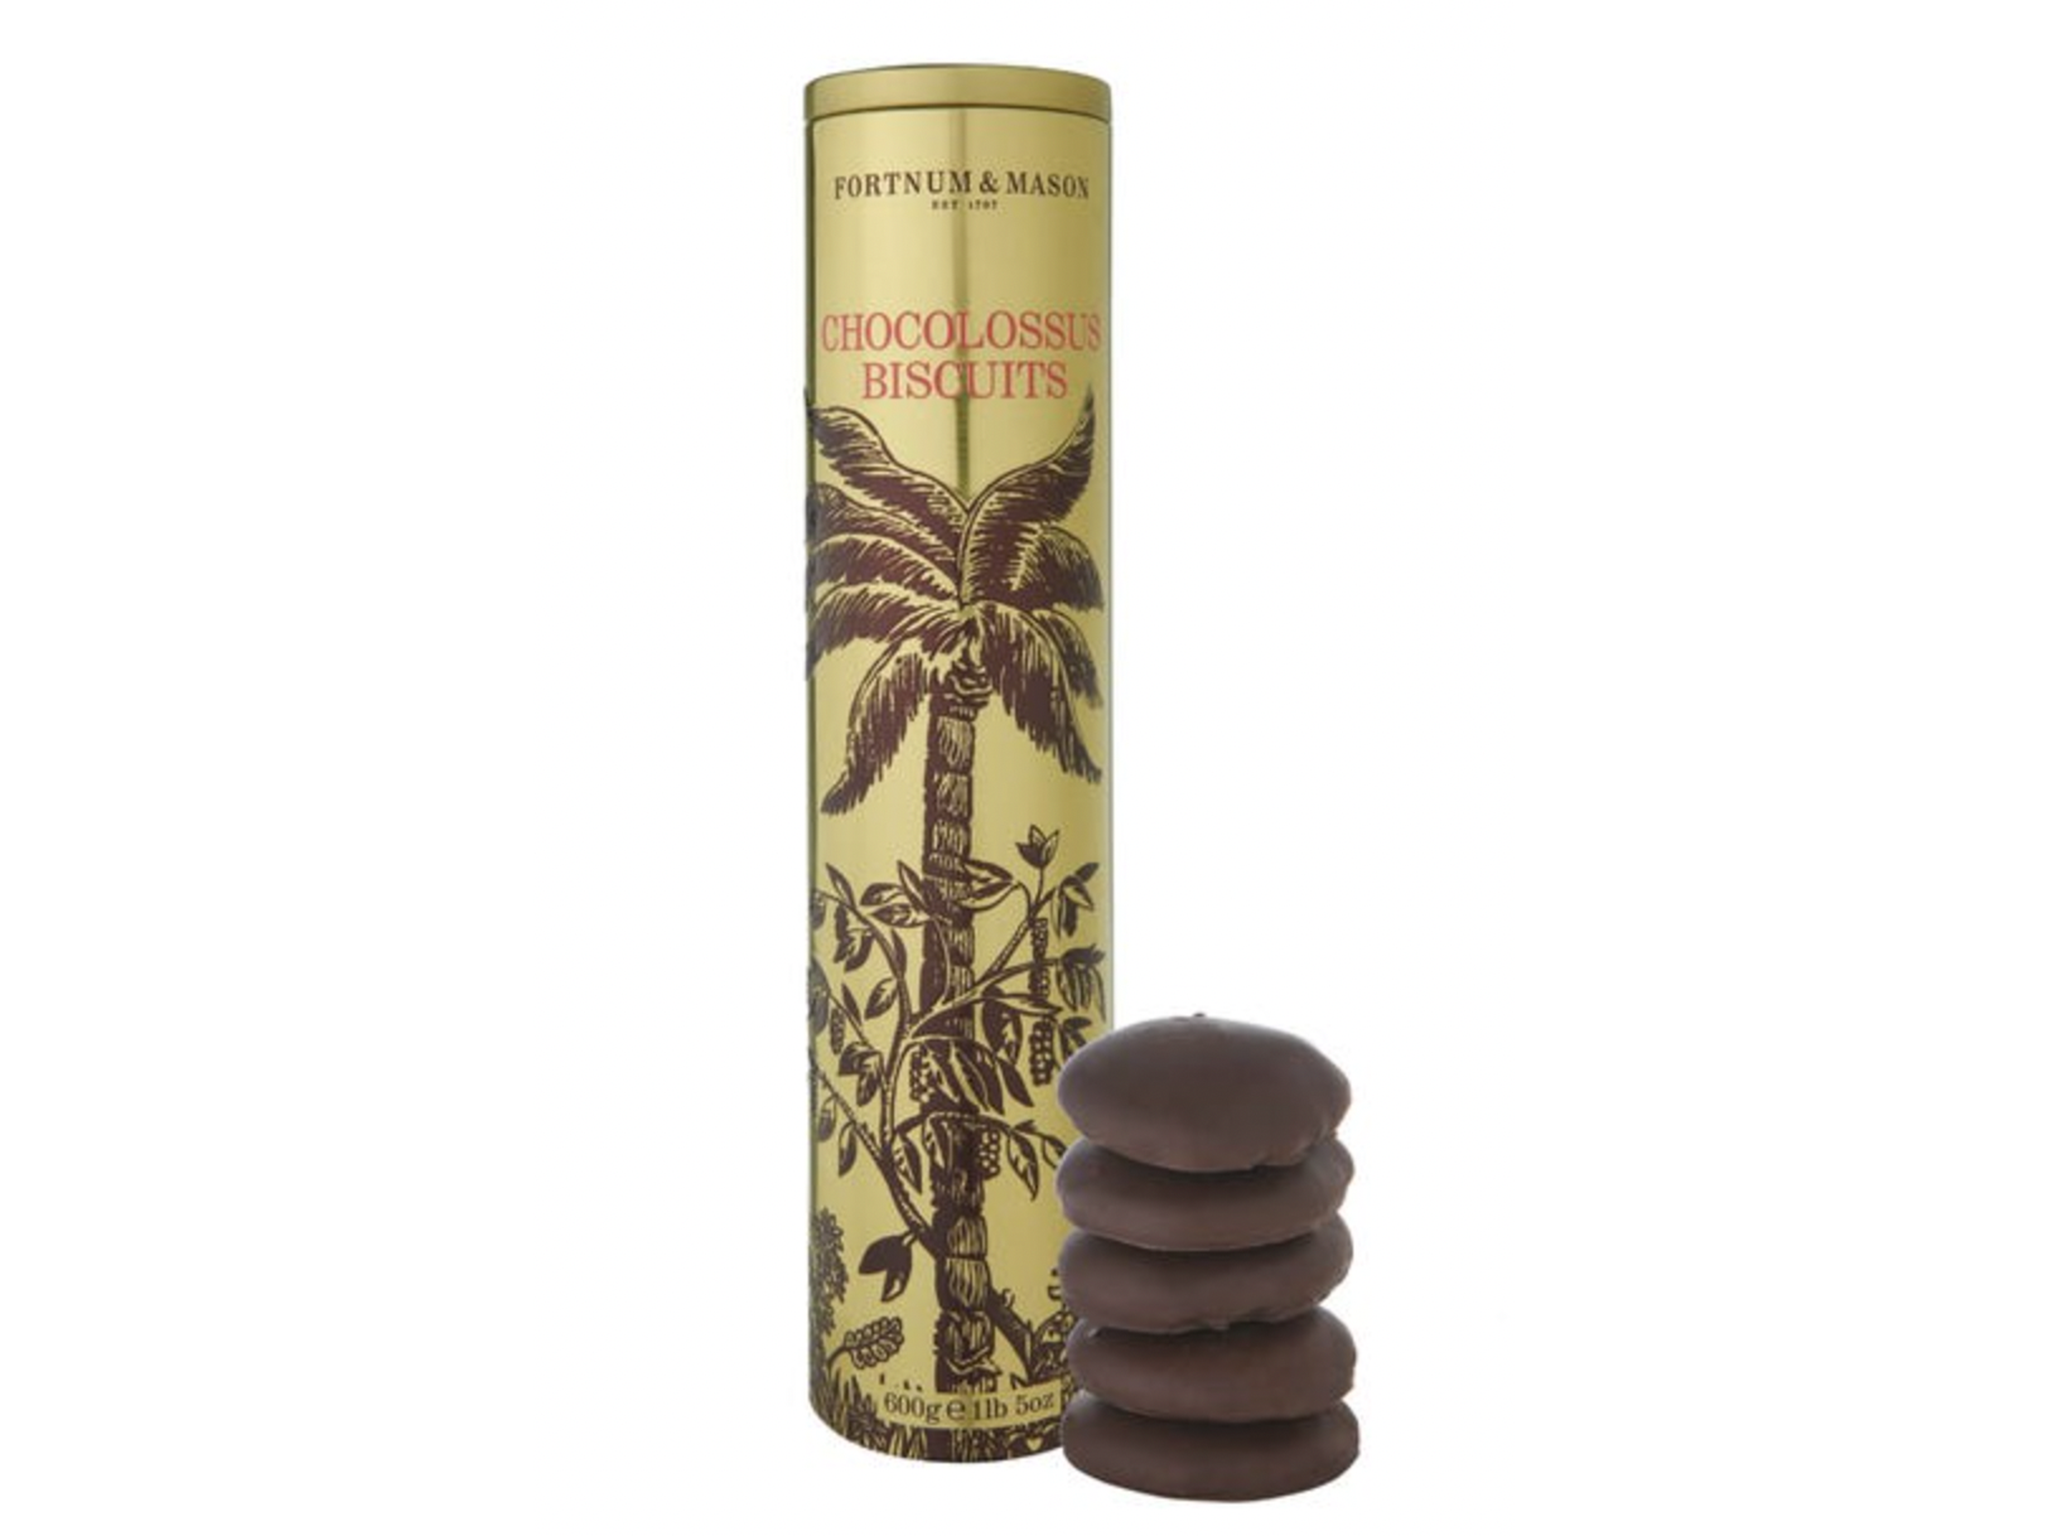 Fortnum & Mason chocolossus biscuits, 600g.png